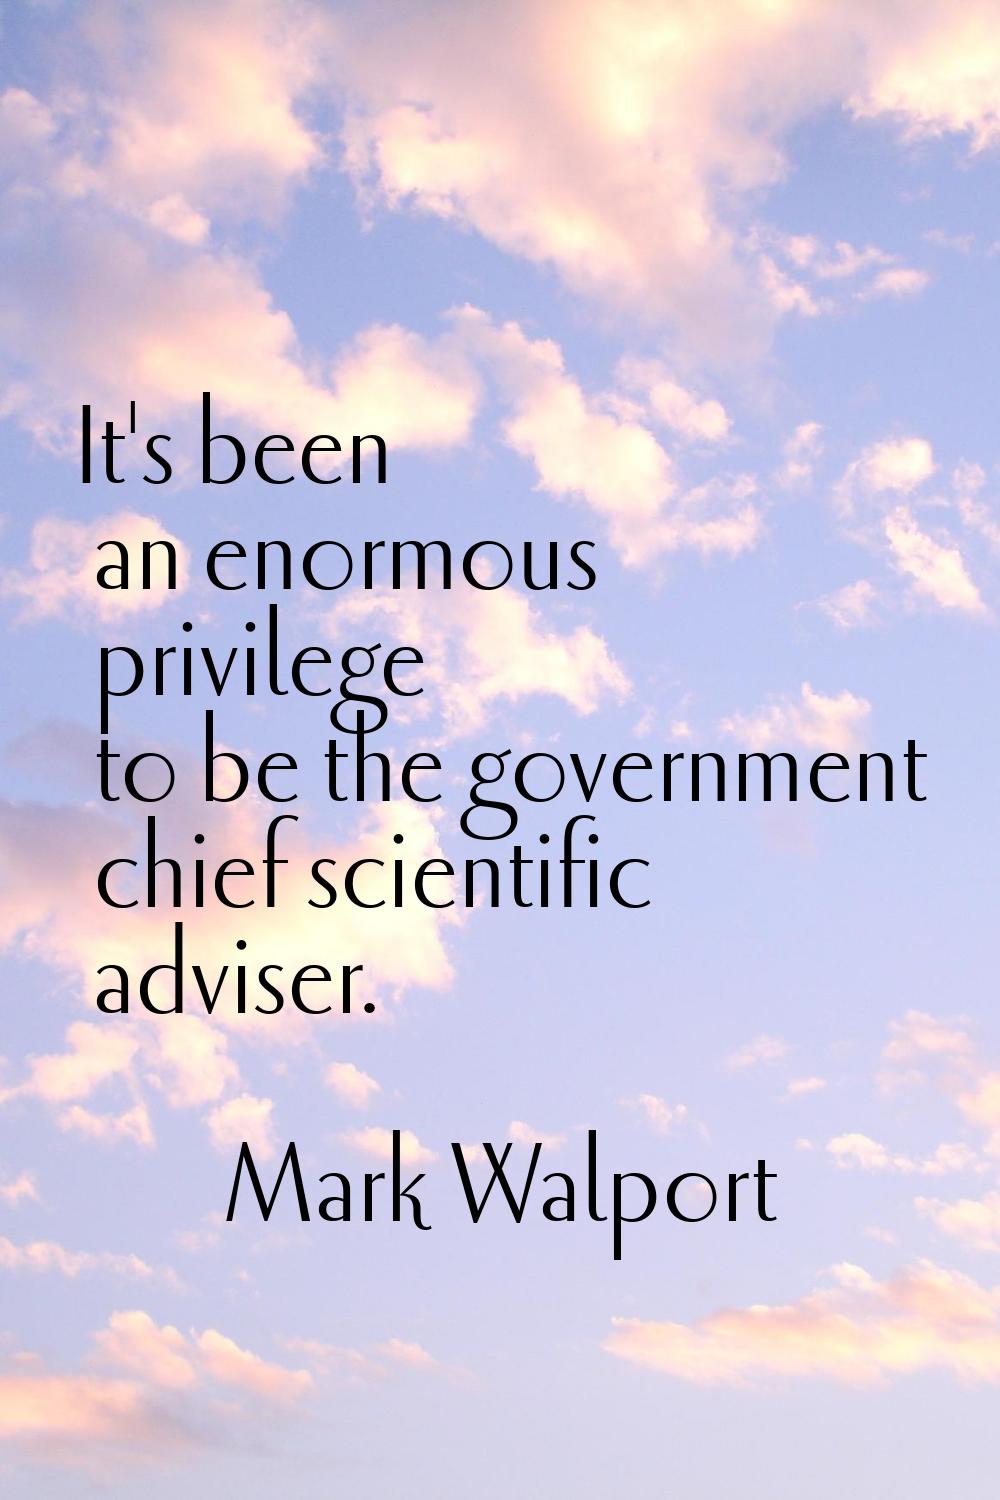 It's been an enormous privilege to be the government chief scientific adviser.